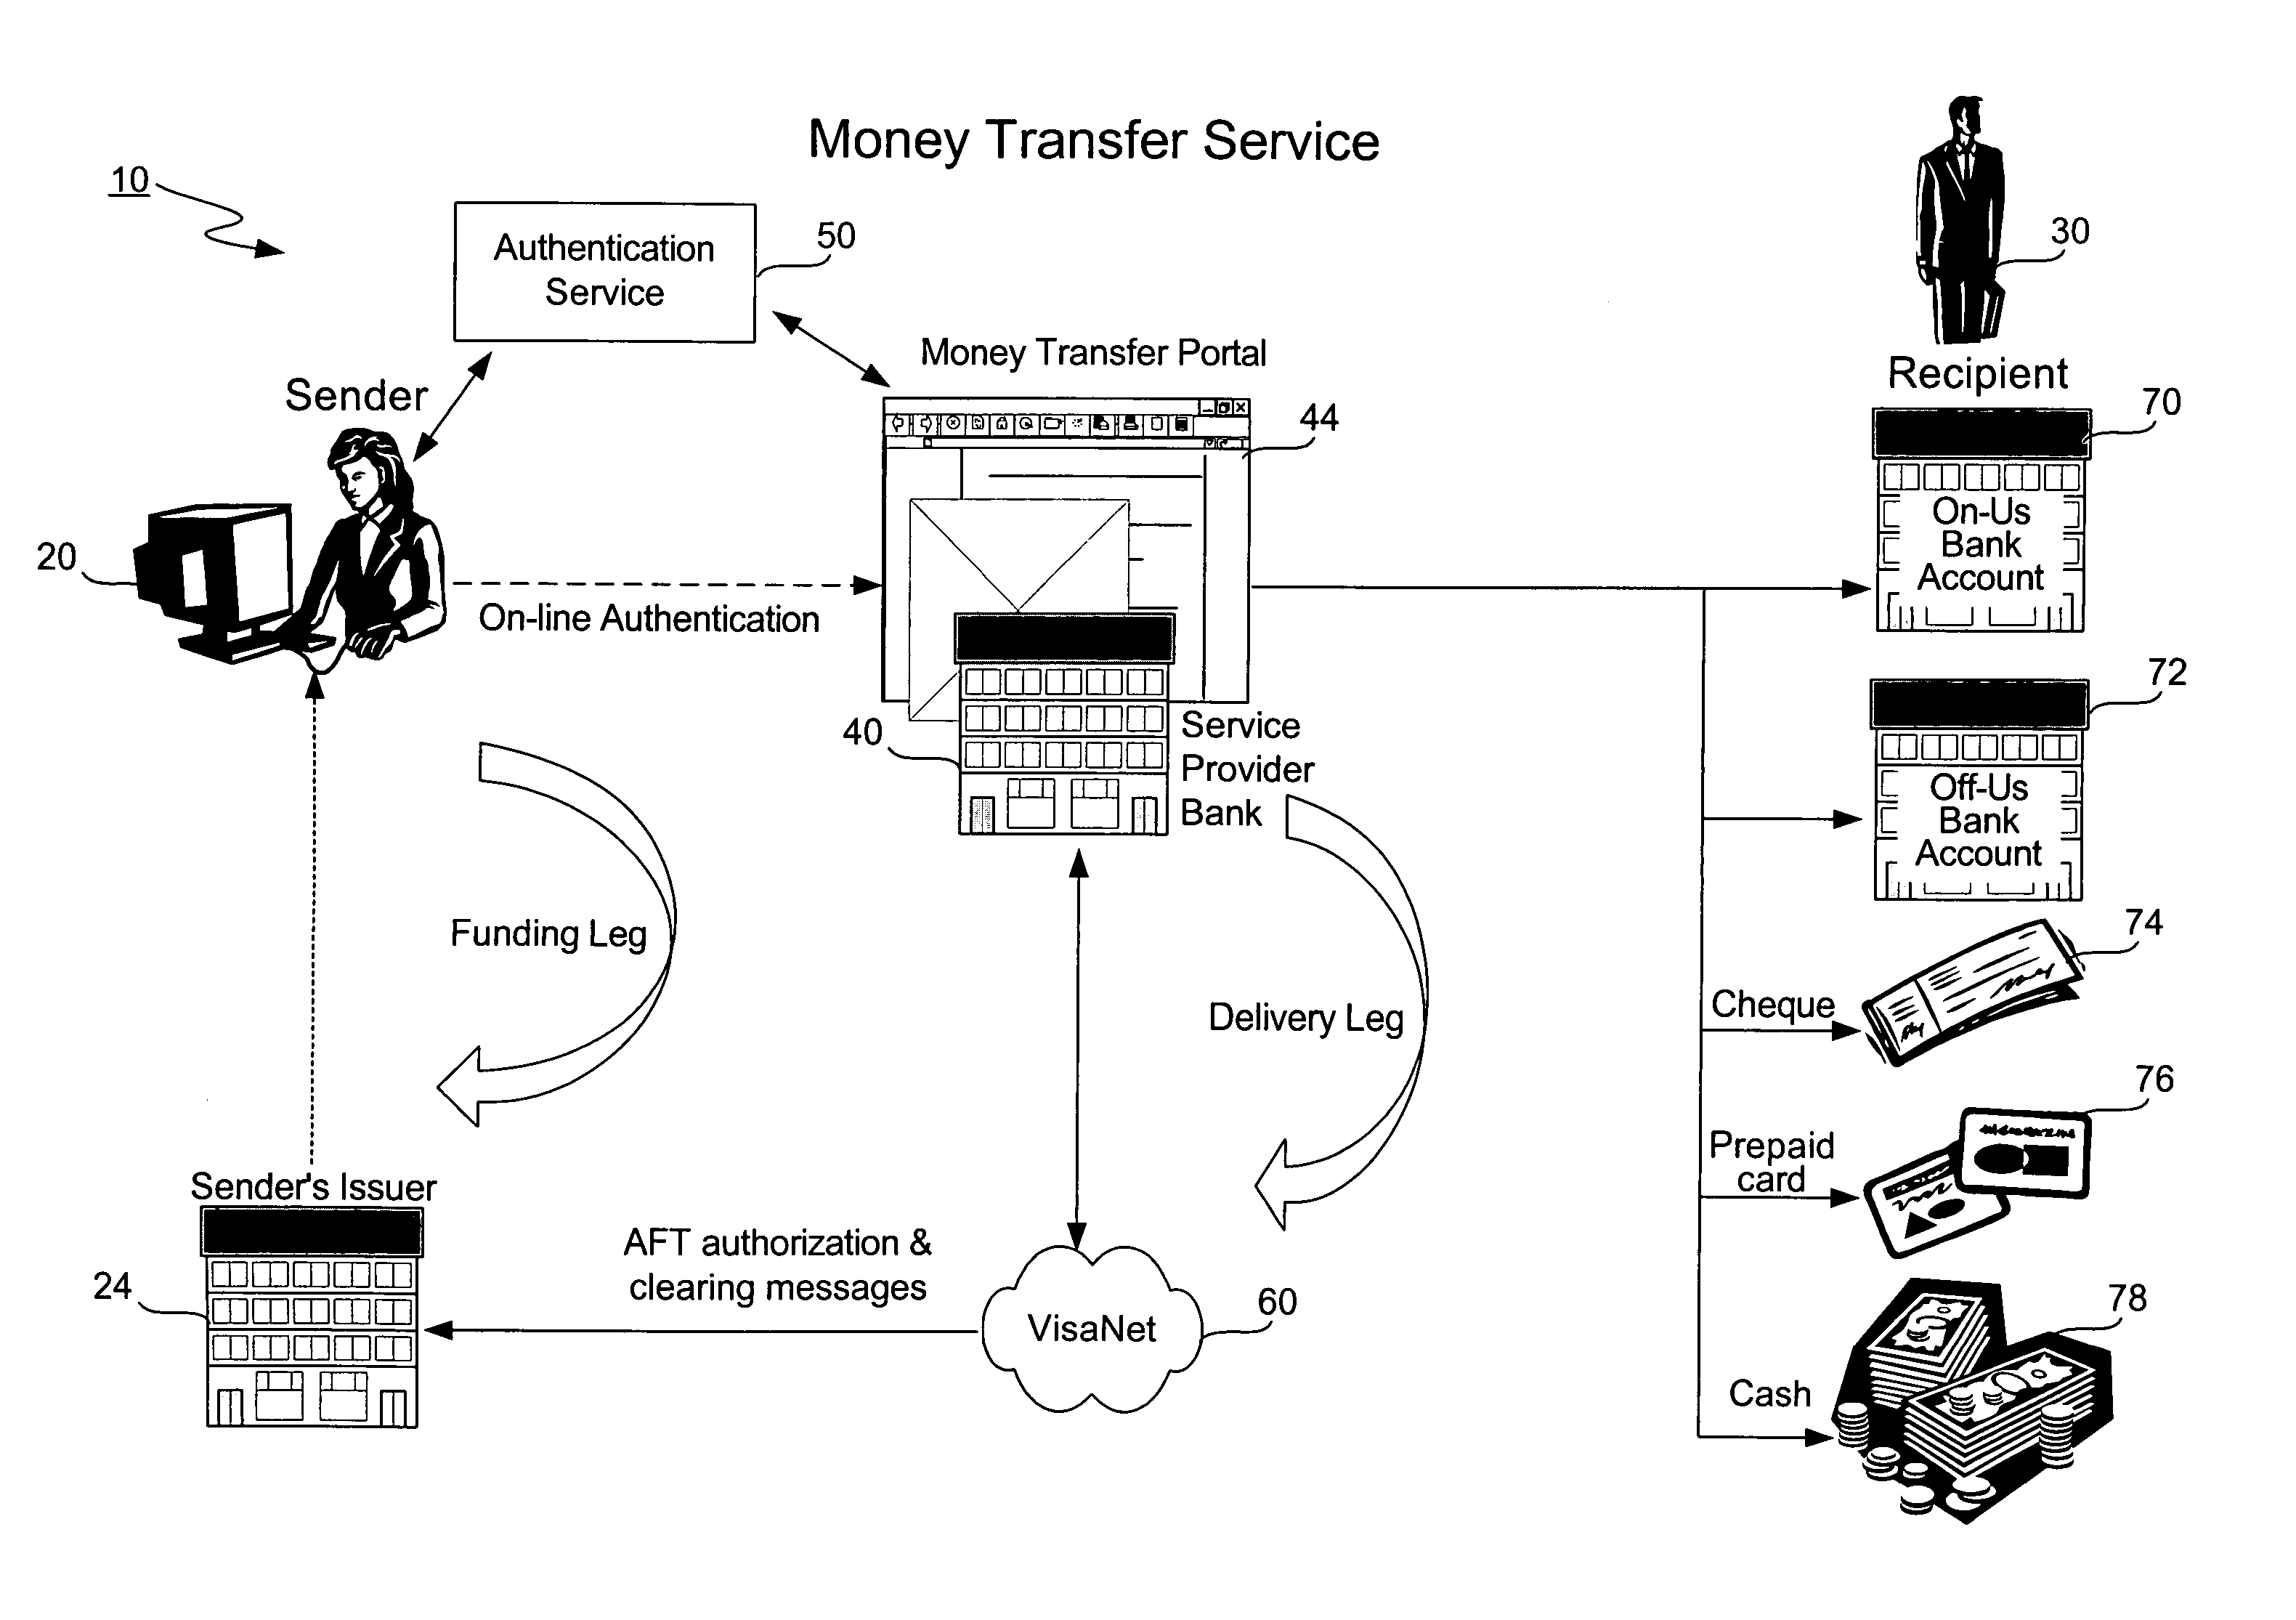 Money transfer service with authentication